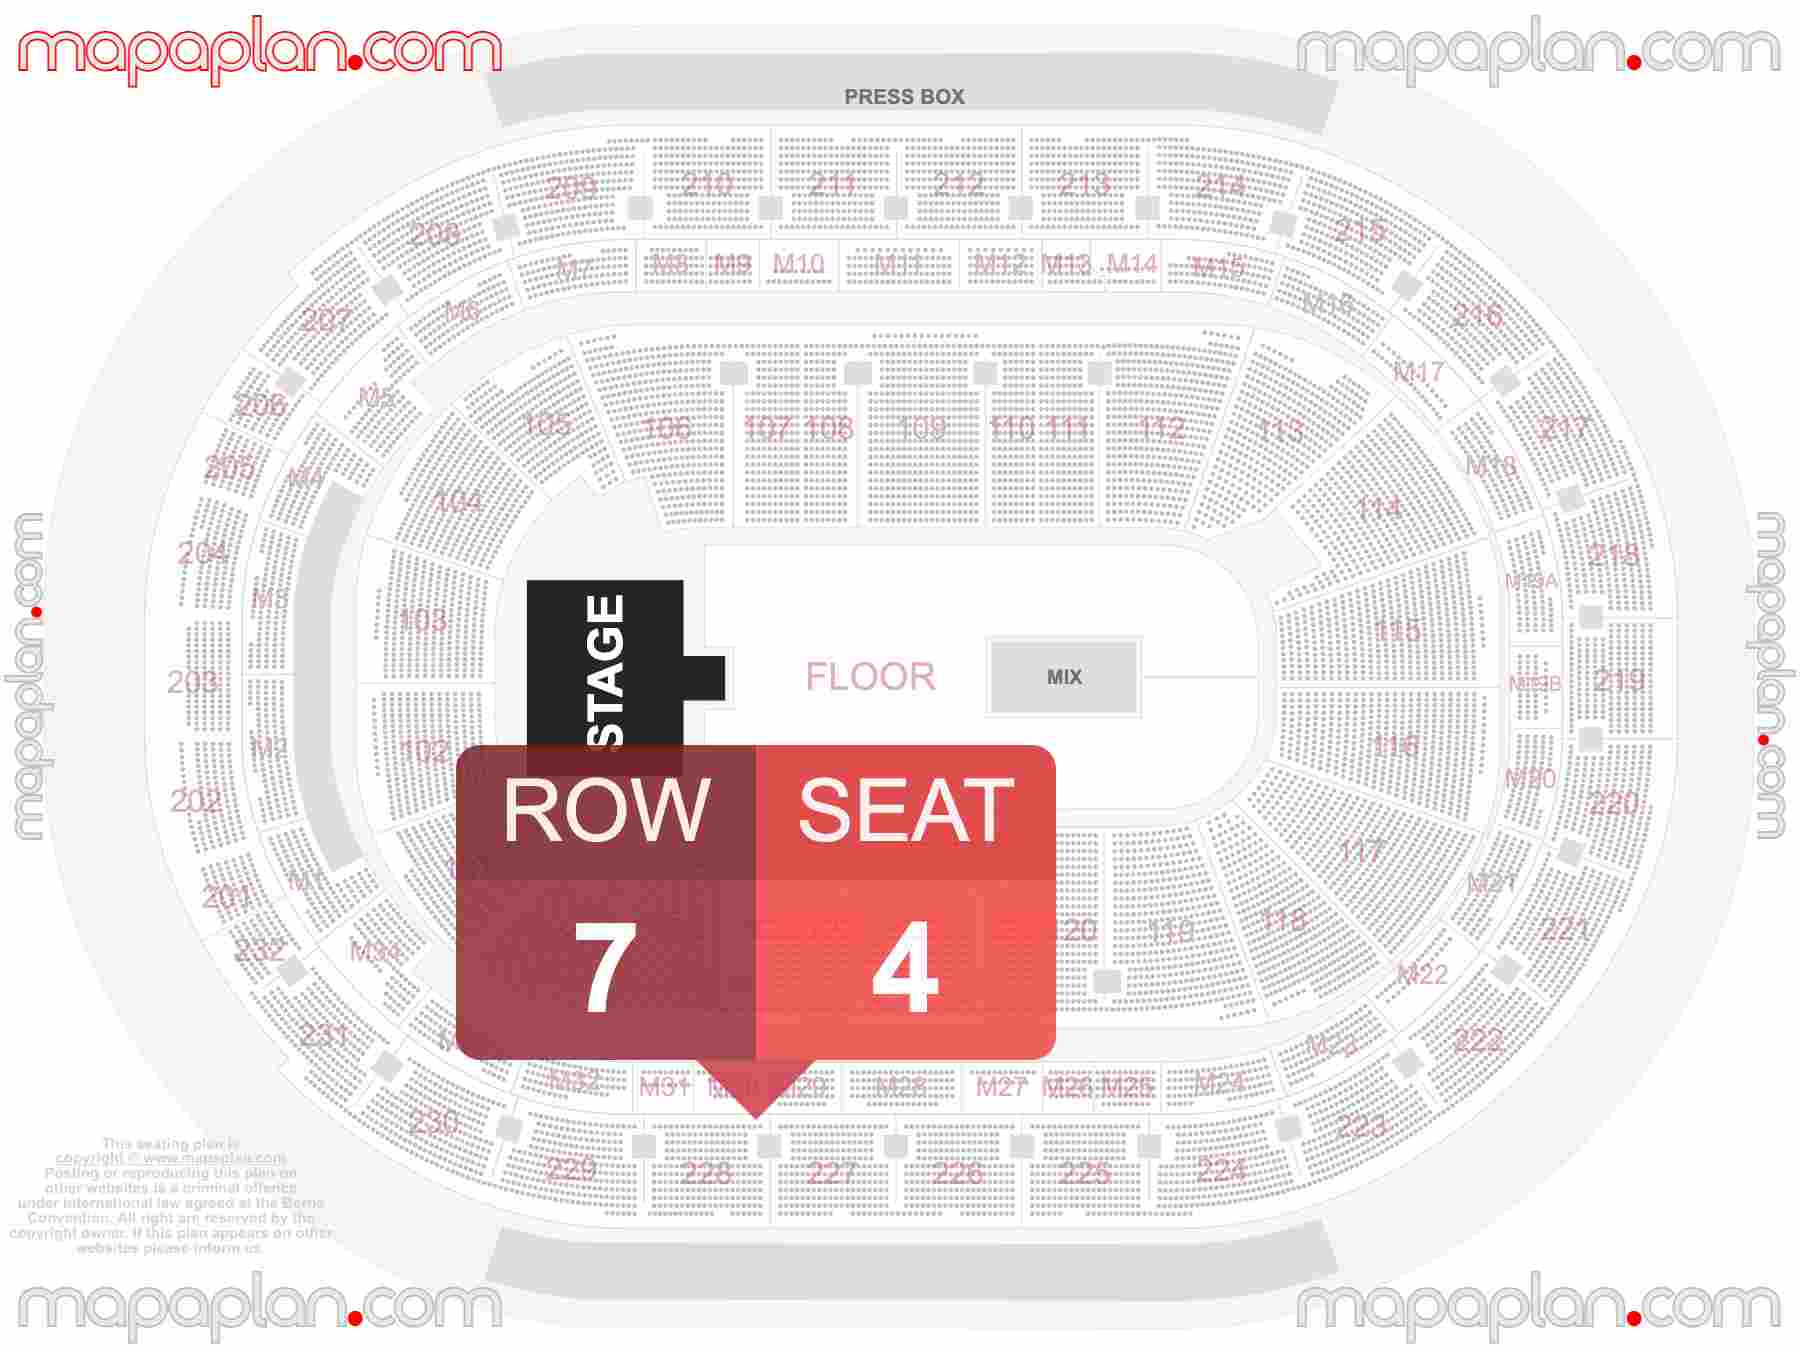 Detroit Little Caesars Arena seating chart Concert with floor general admission standing seating chart with exact section numbers showing best rows and seats selection 3d layout - Best interactive seat finder tool with precise detailed location data